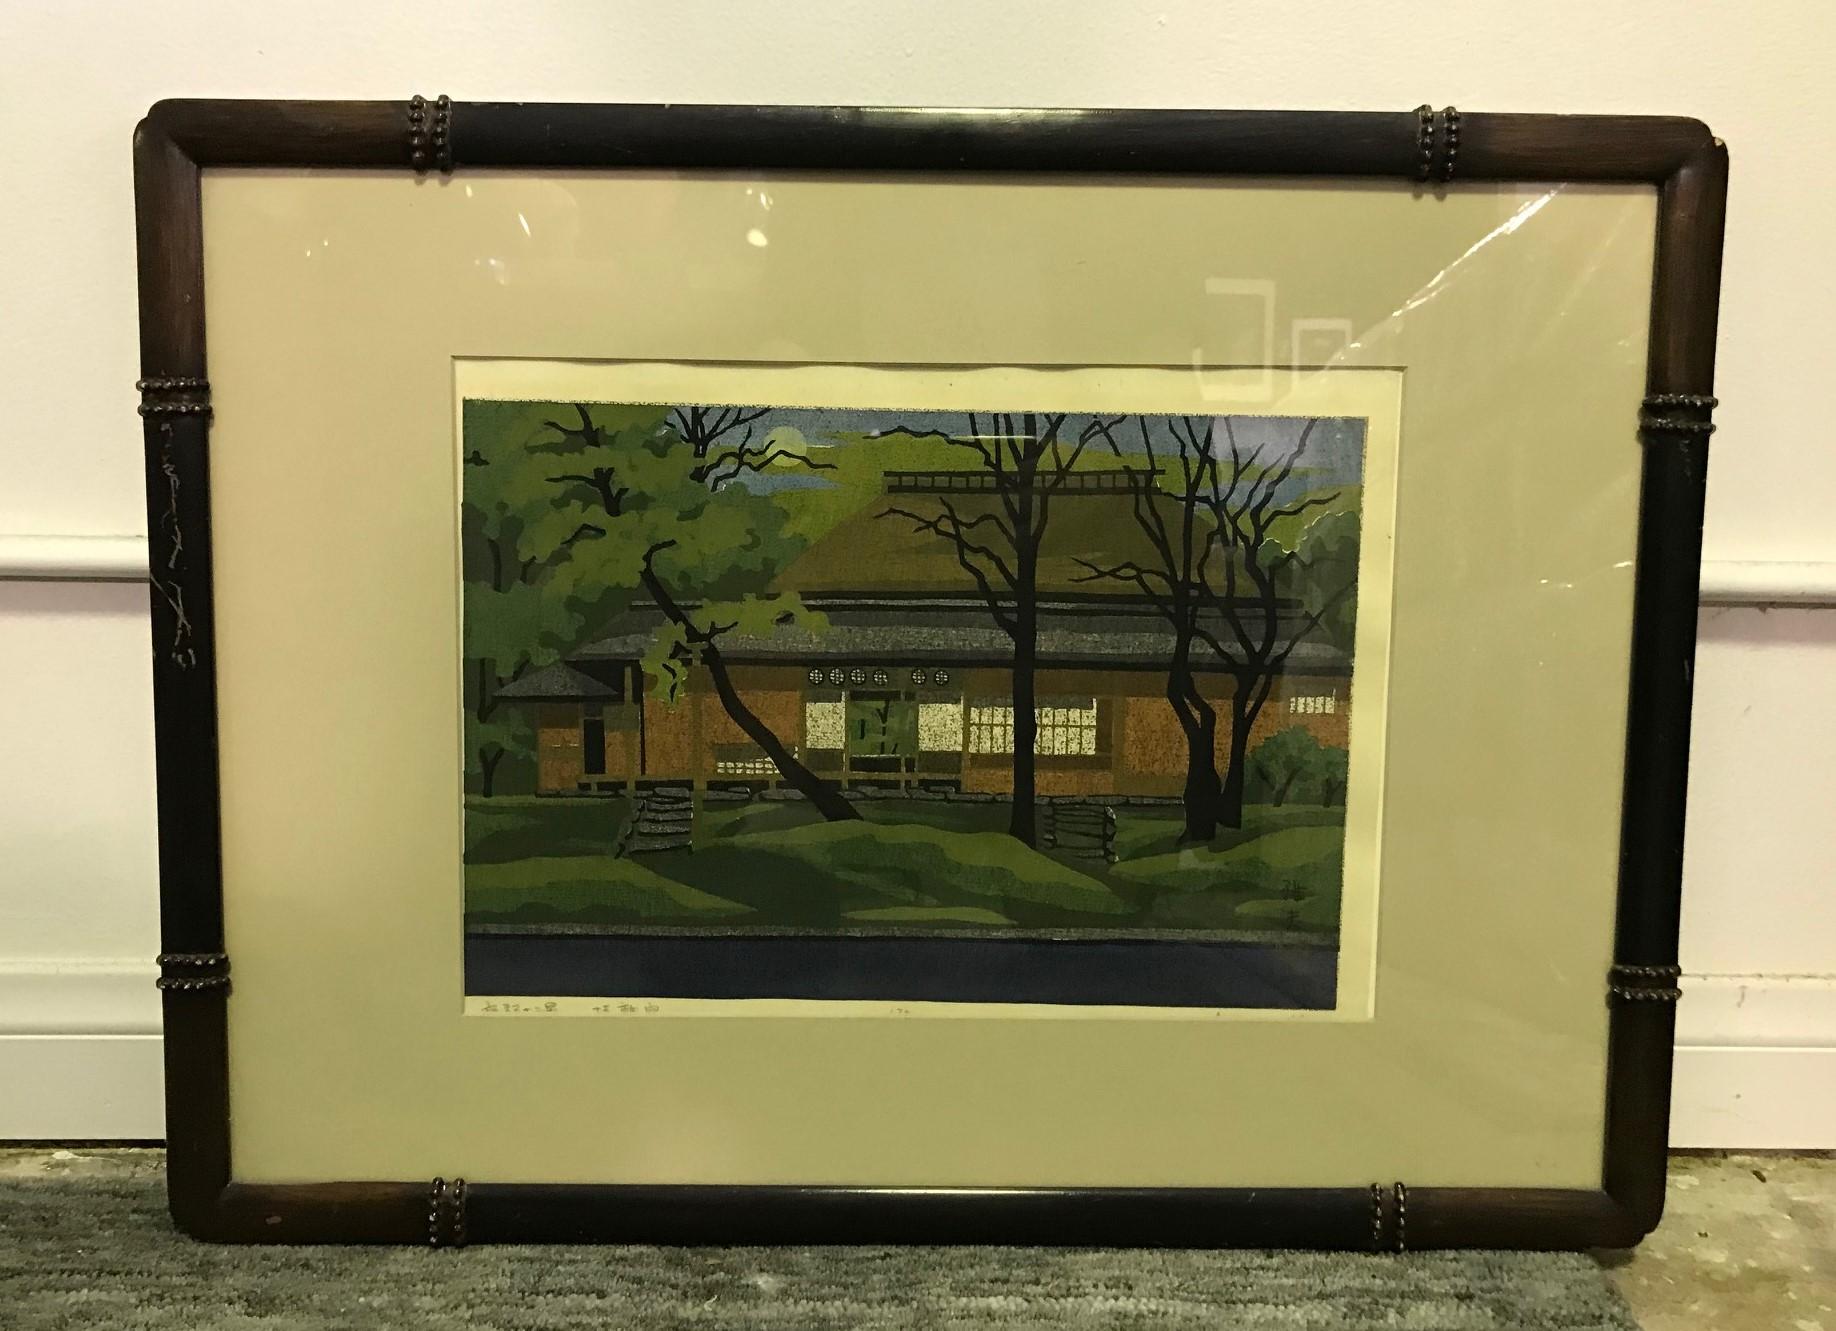 A very beautifully composed and colored work of a Japanese temple or house by Japanese artist Masao Ido.

Pencil signed, dated, titled (in Japanese), and numbered by the artist.

A nice addition to any modern Japanese art and print collection.